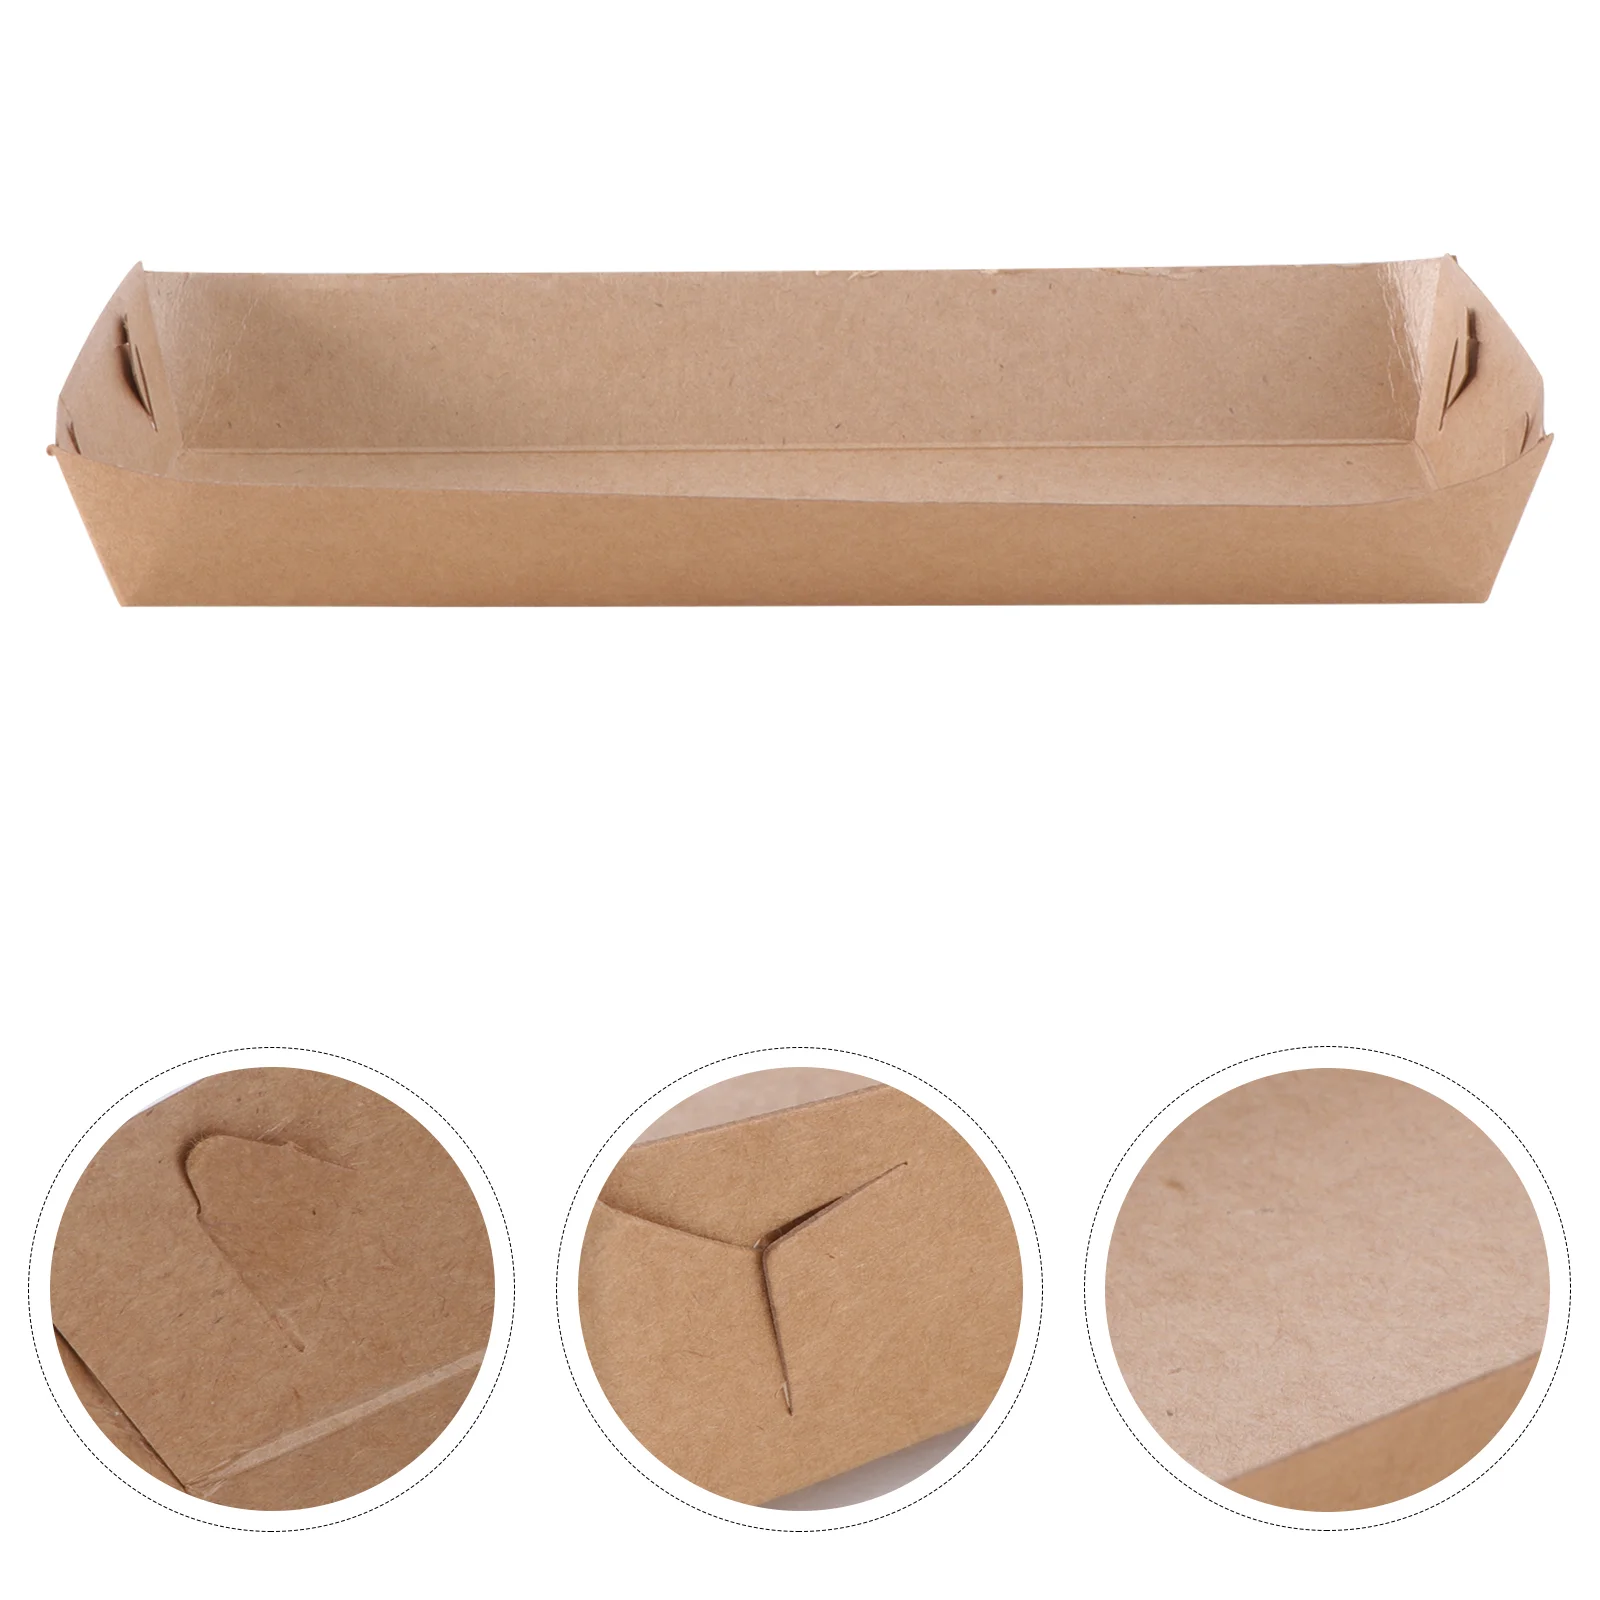 

50 Pcs Disposable Paper Food Serving Tray Kraft Paper Coating Boat Shape Snack Open Box French Fries Chicken Box (20 x 6 x 3cm)